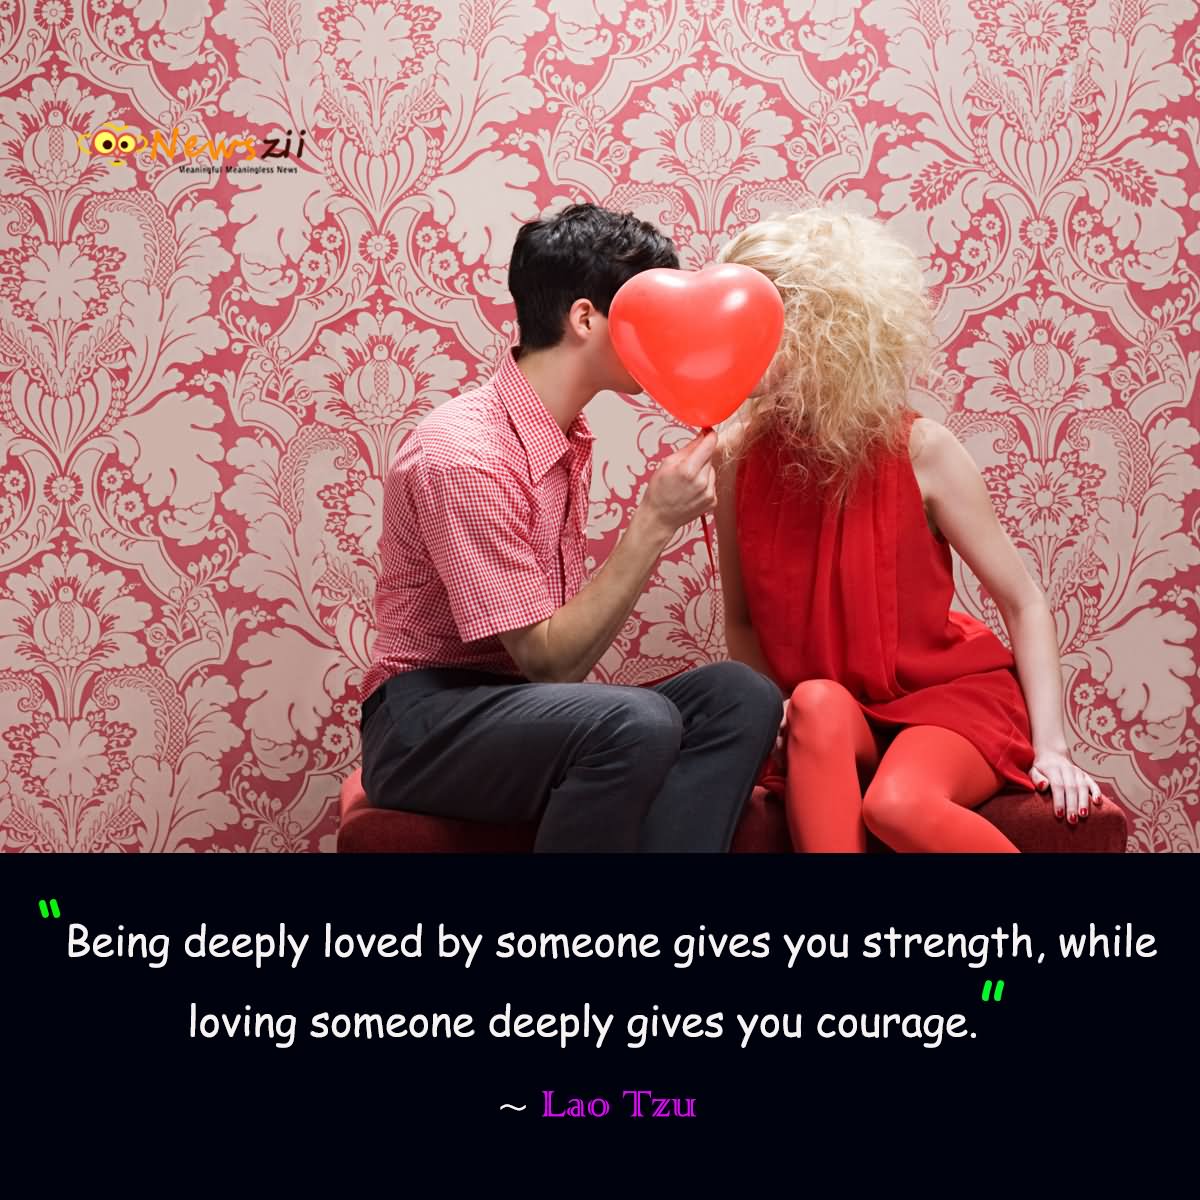 being deeply loved by someone gives you strength,while loving someone deeply gives you courage. Lao Tzu..